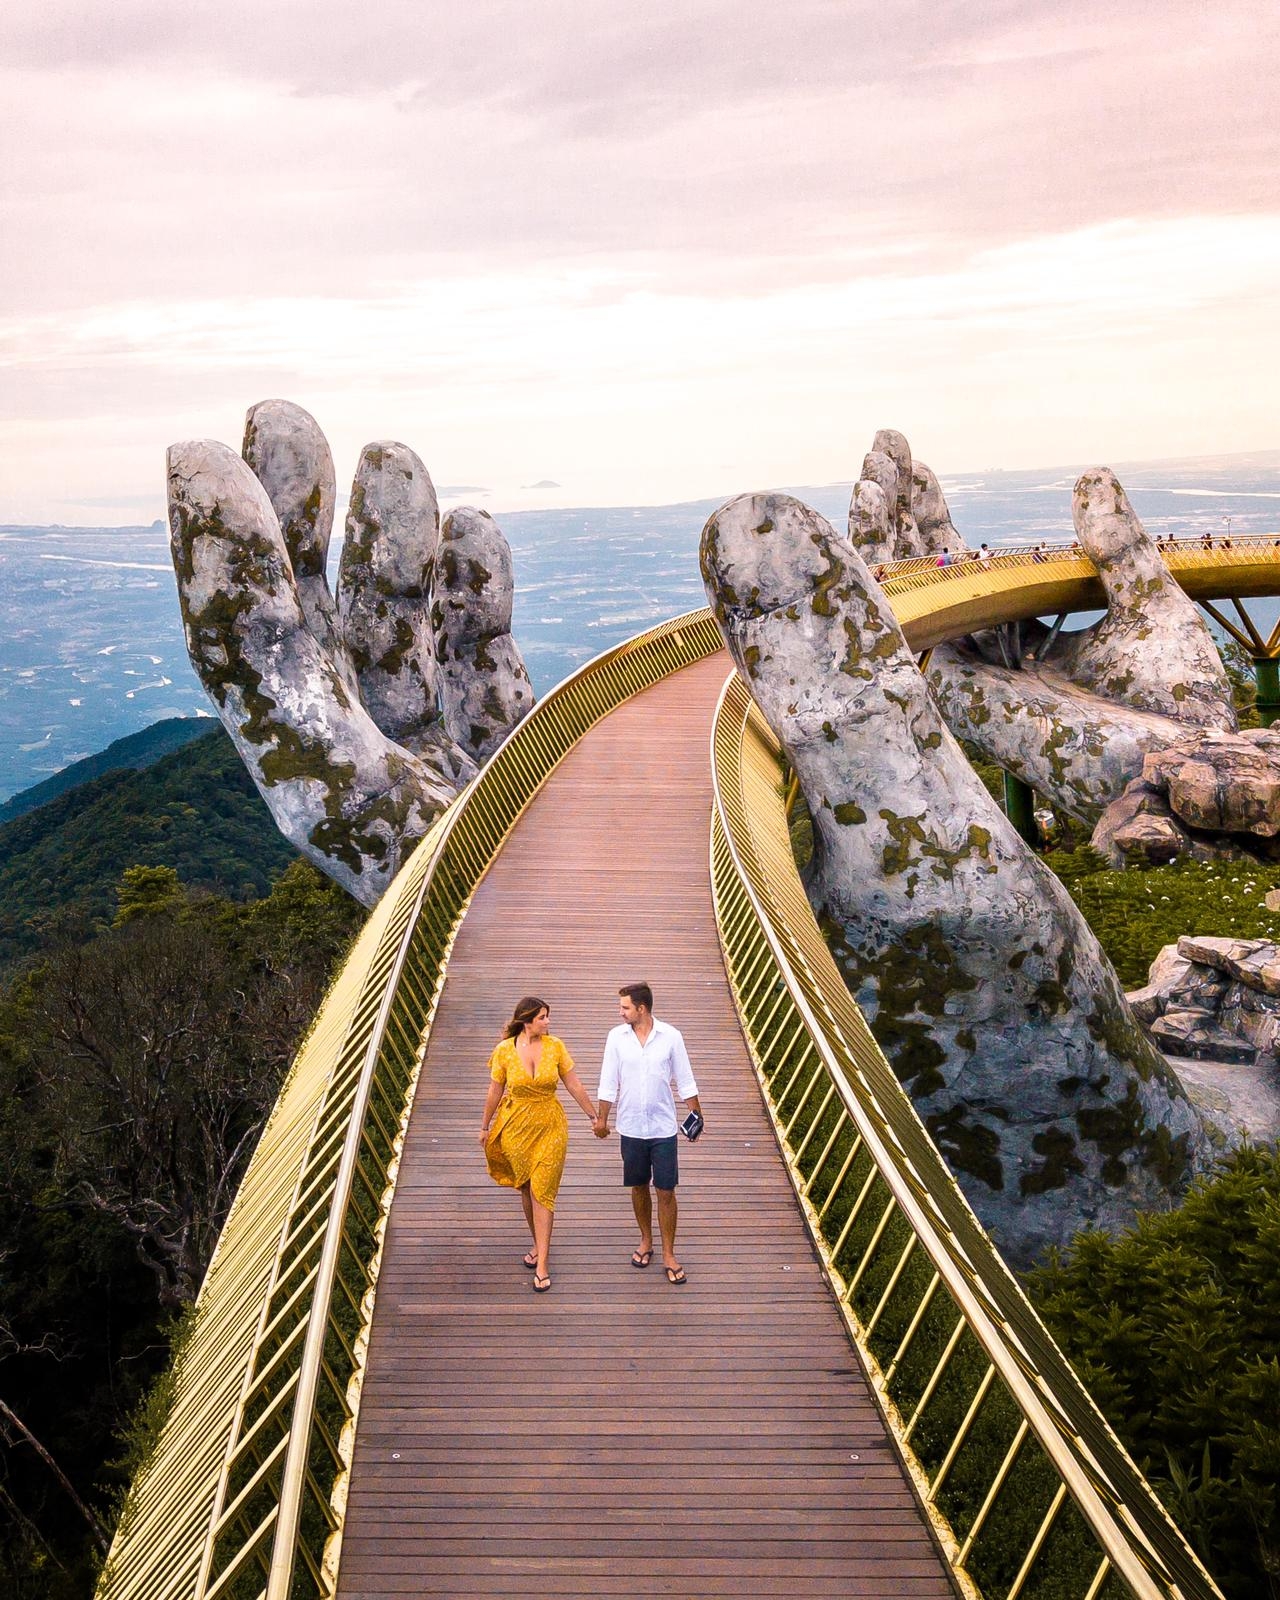 The bridge is a must-visit place in Da Nang